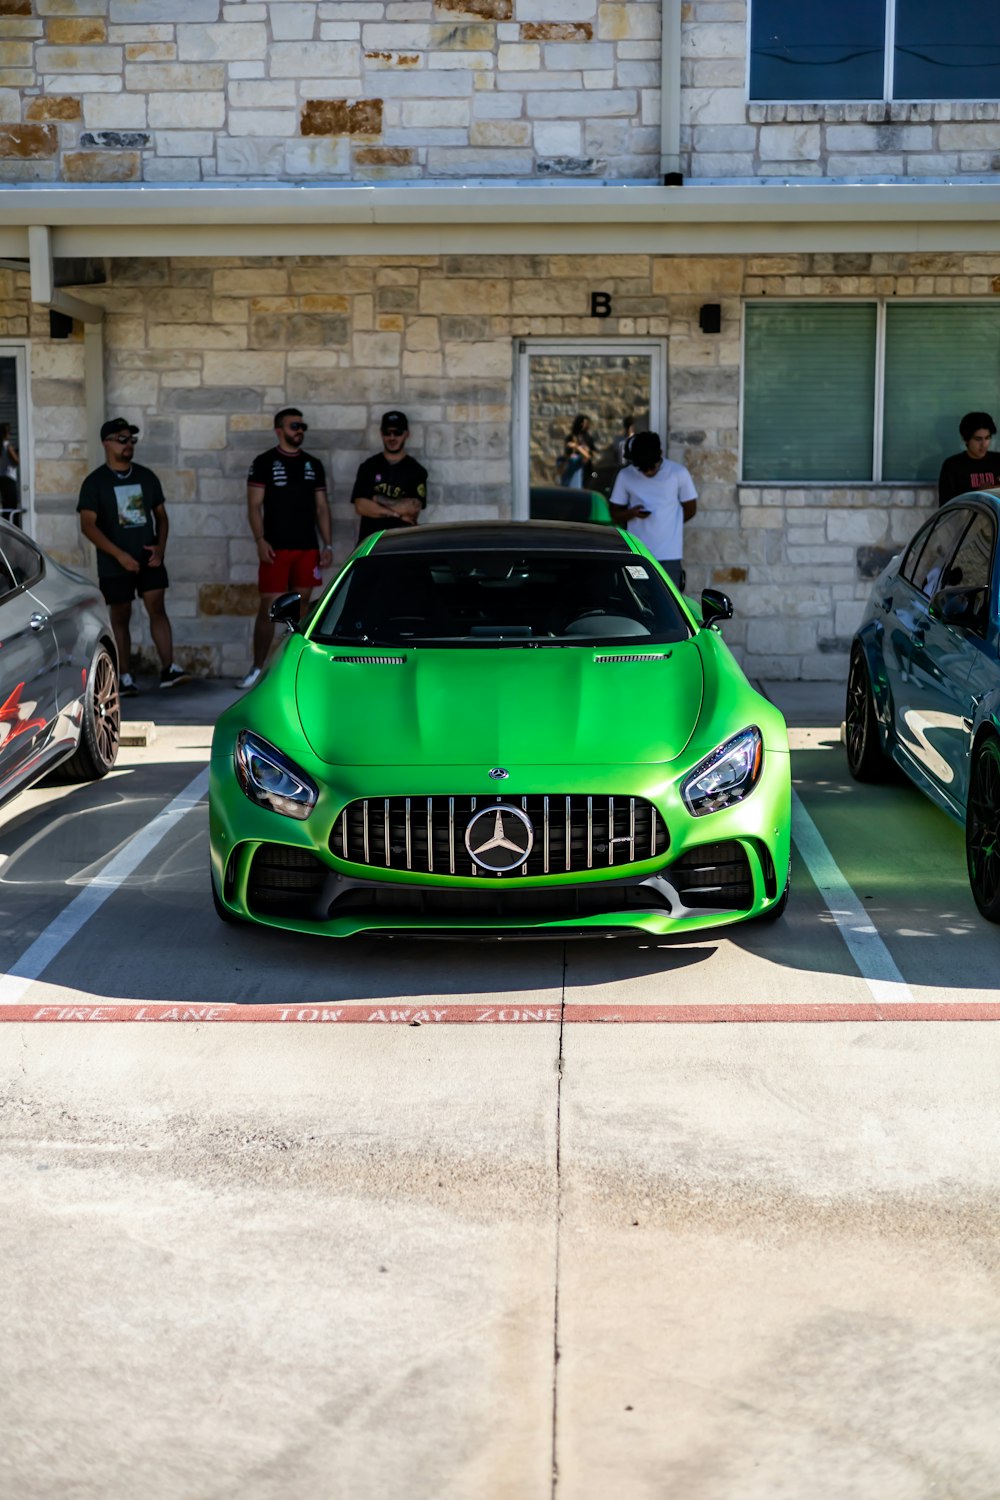 a green sports car parked in front of a building with people standing around